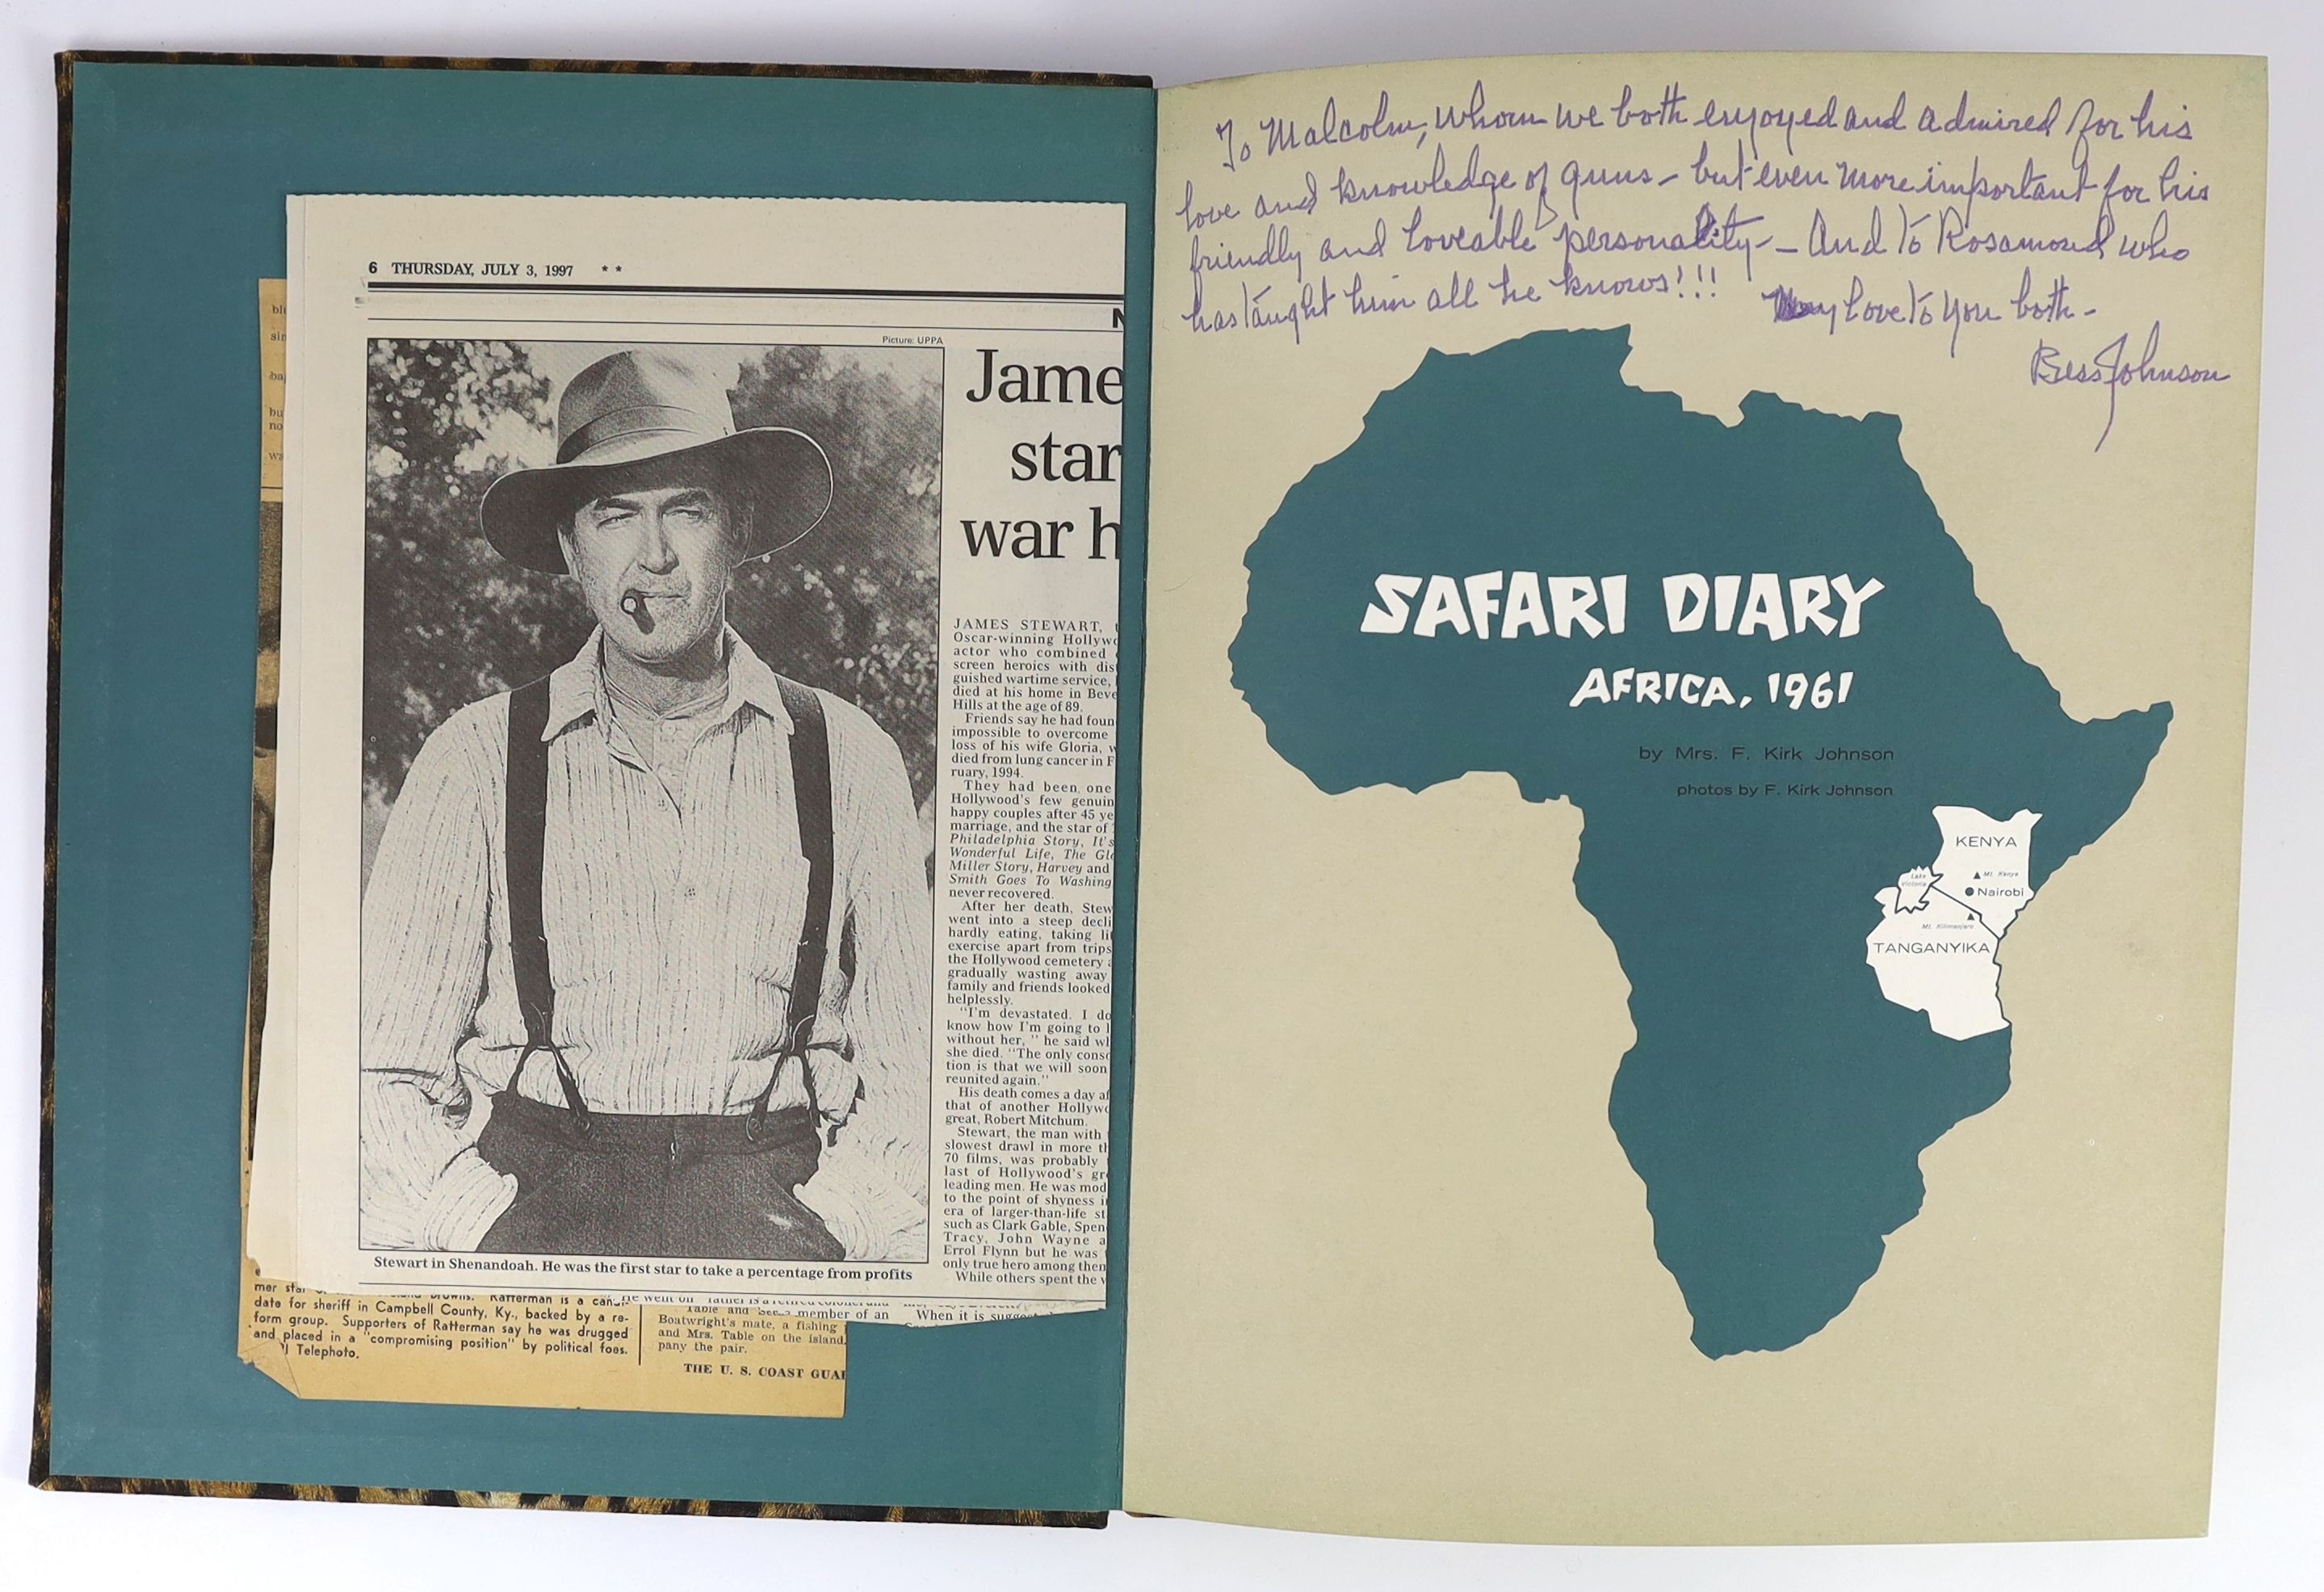 Johnson, F. Kirk [Mrs.] Safari Diary, 1961. Folio, published by the author, no place of publication, 1961. Coloured and black and white photographic illustrations, most by Fran Kirk, the author’s husband. Faux leopard sk